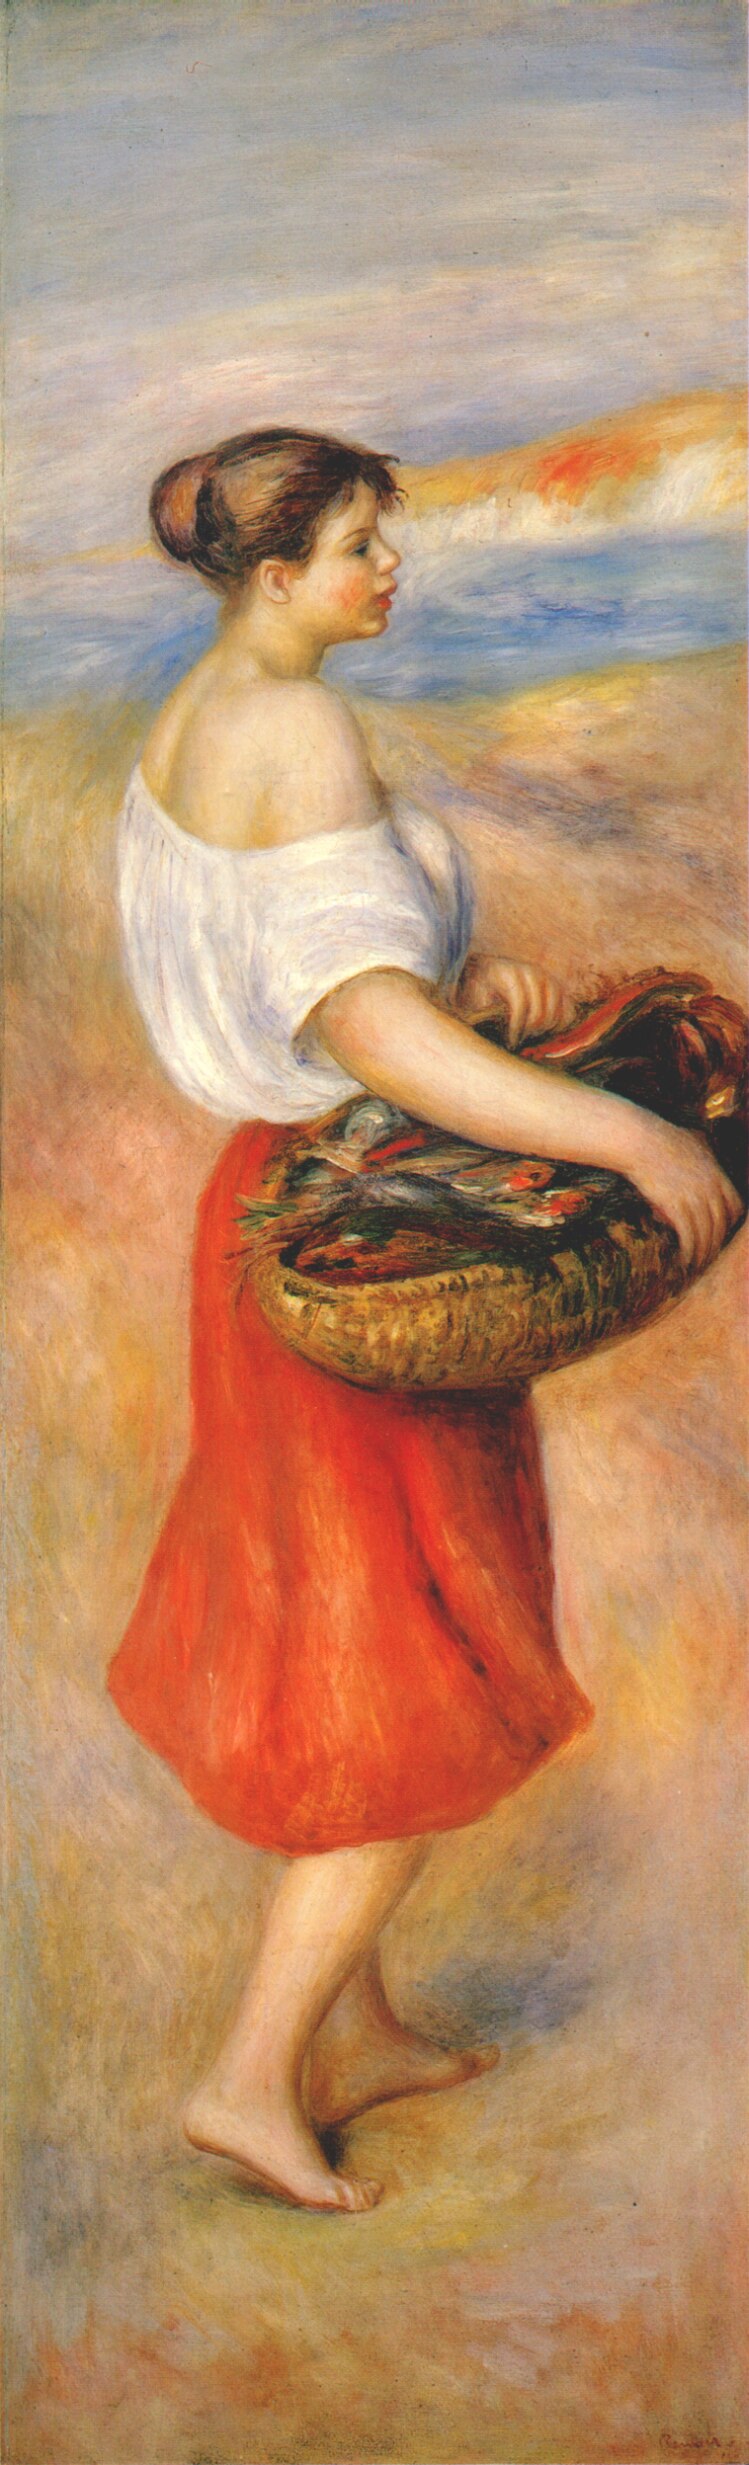 Girl with a basket of fish - Pierre-Auguste Renoir painting on canvas